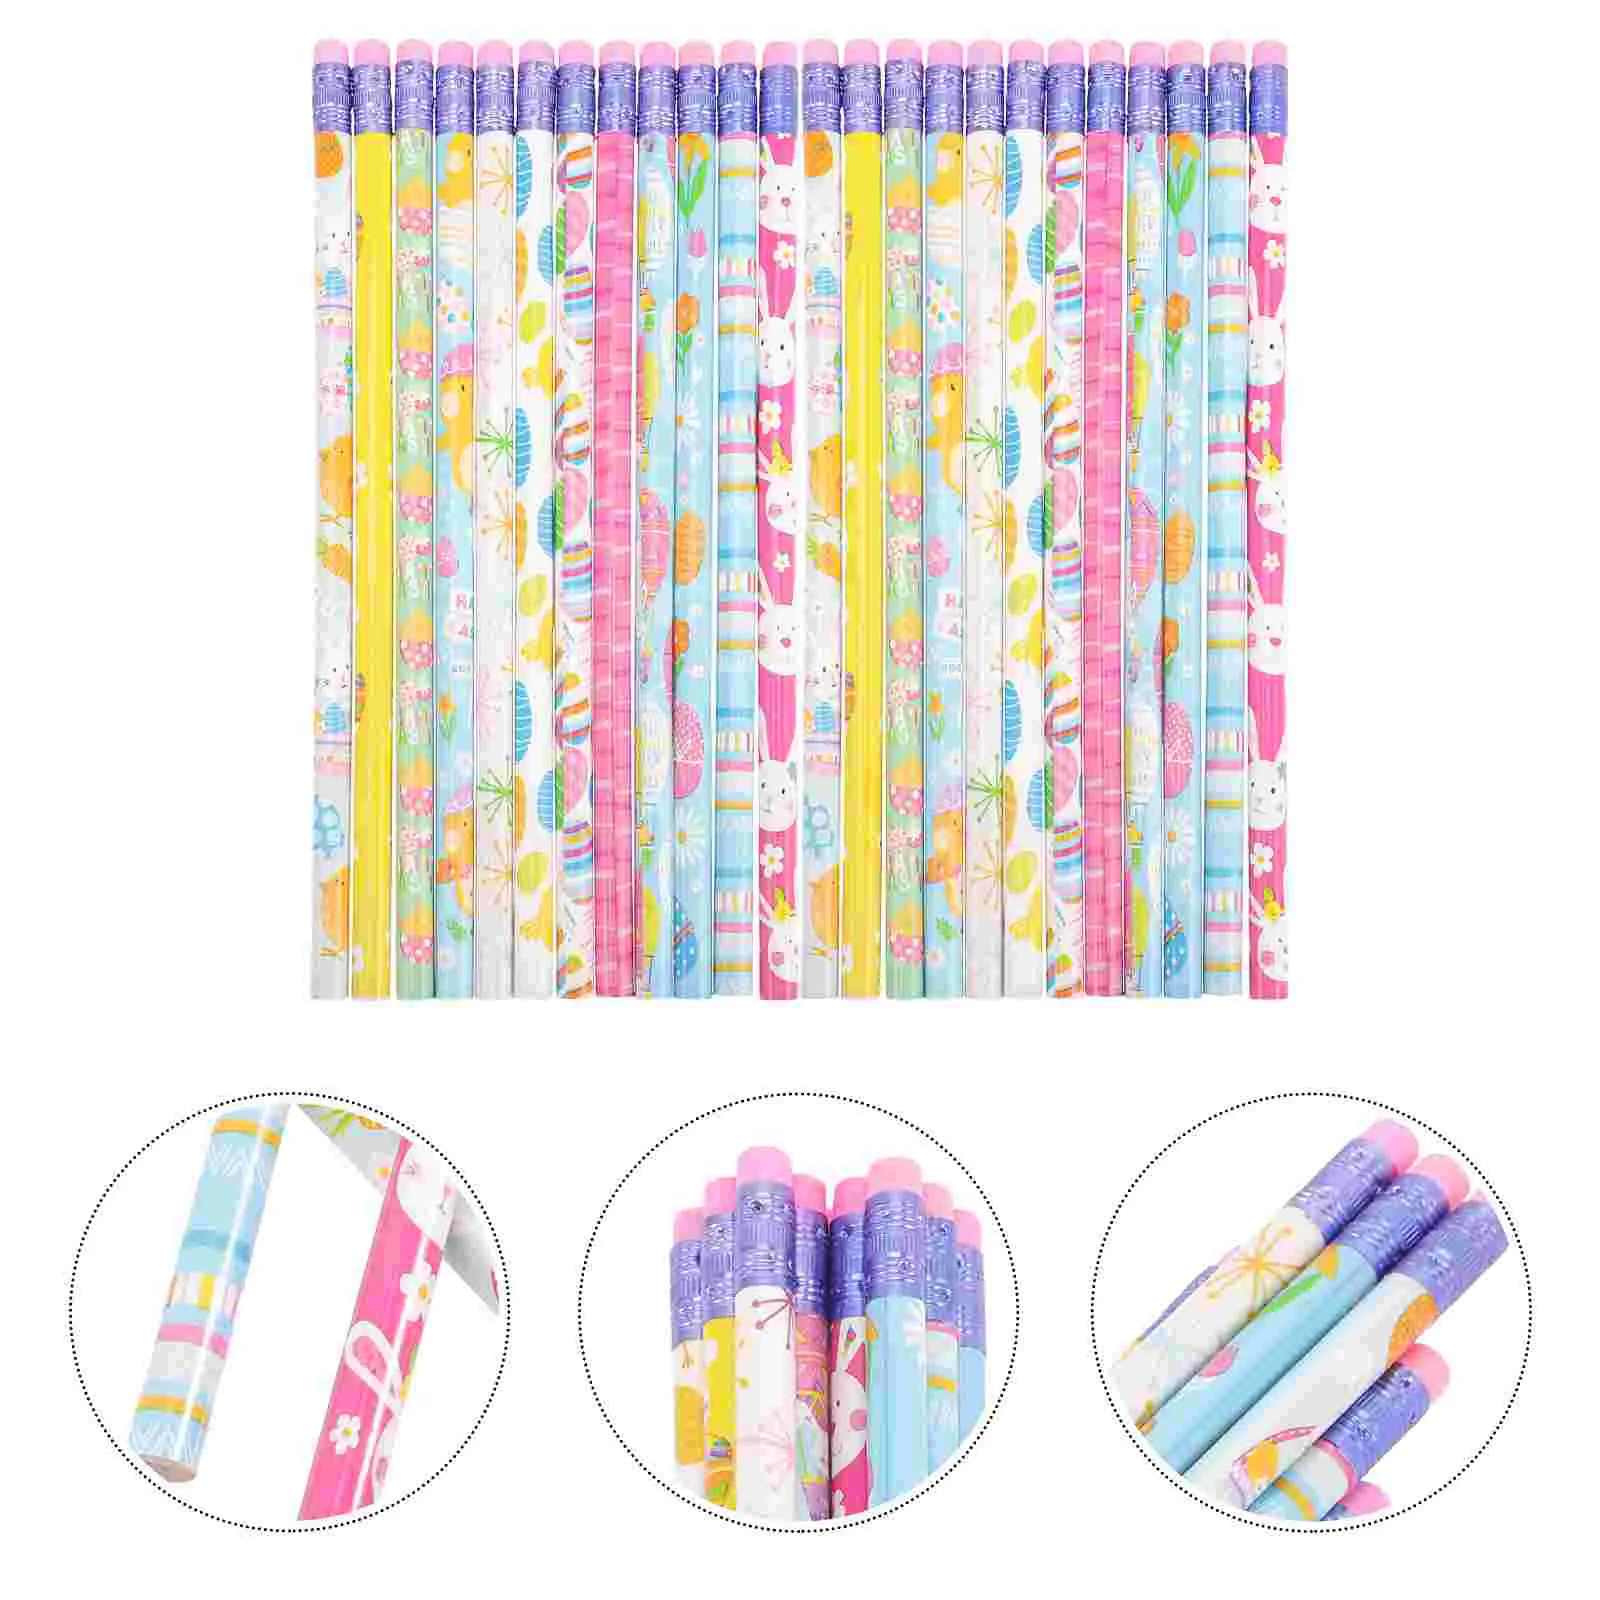 

50pcs Easter Pencils Adorable Students Pencils Kids Writing Pencils with Erasers